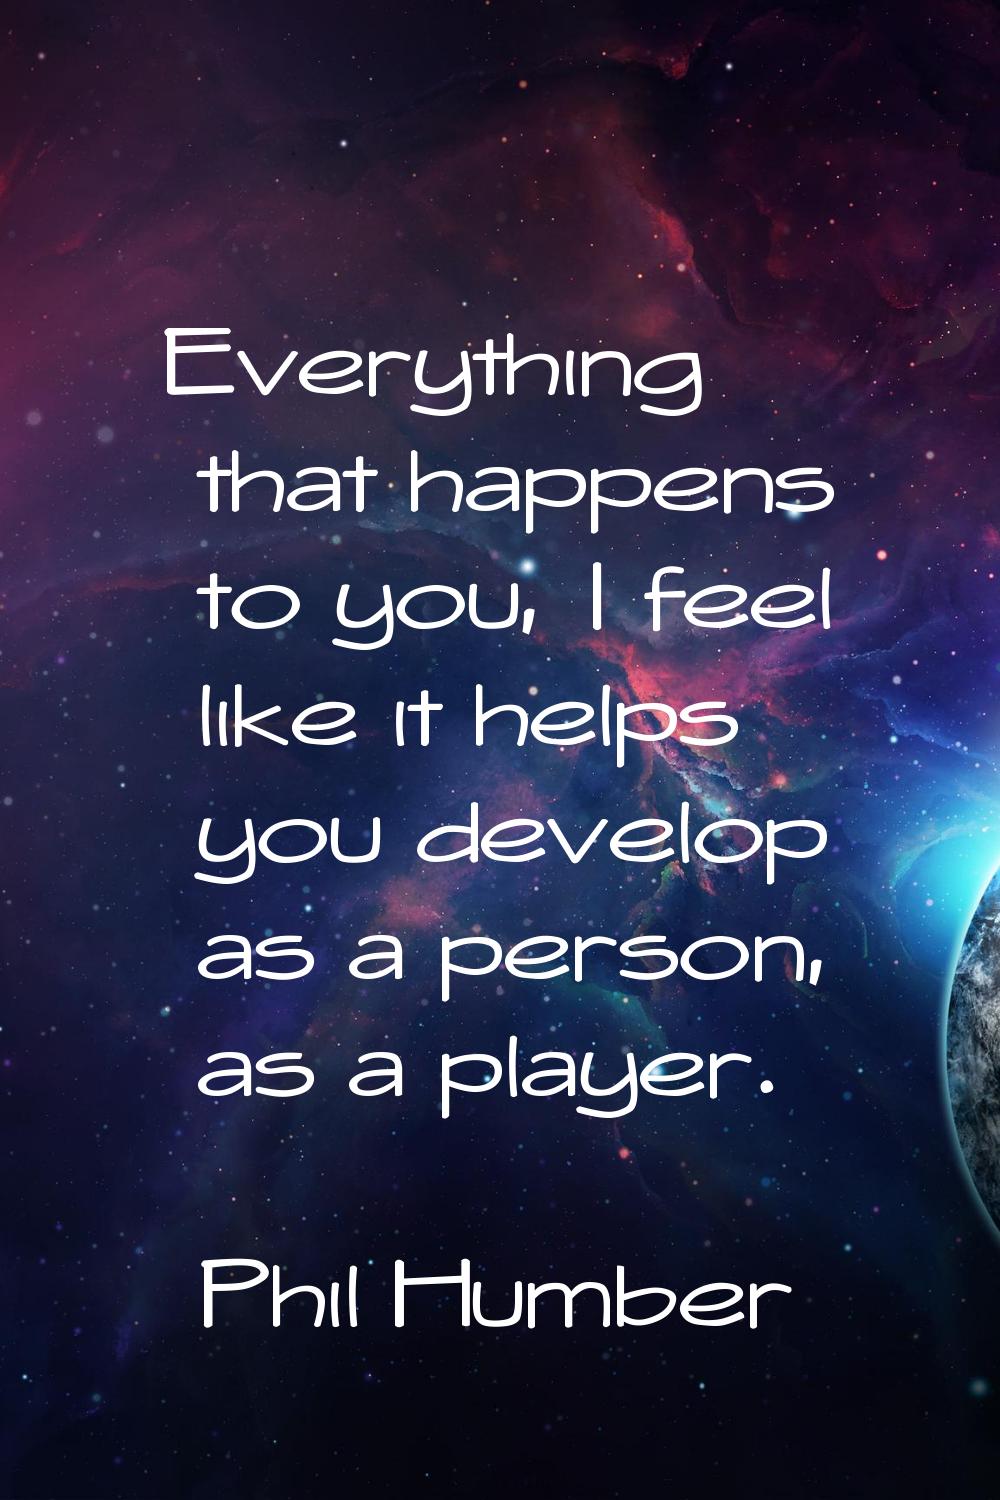 Everything that happens to you, I feel like it helps you develop as a person, as a player.